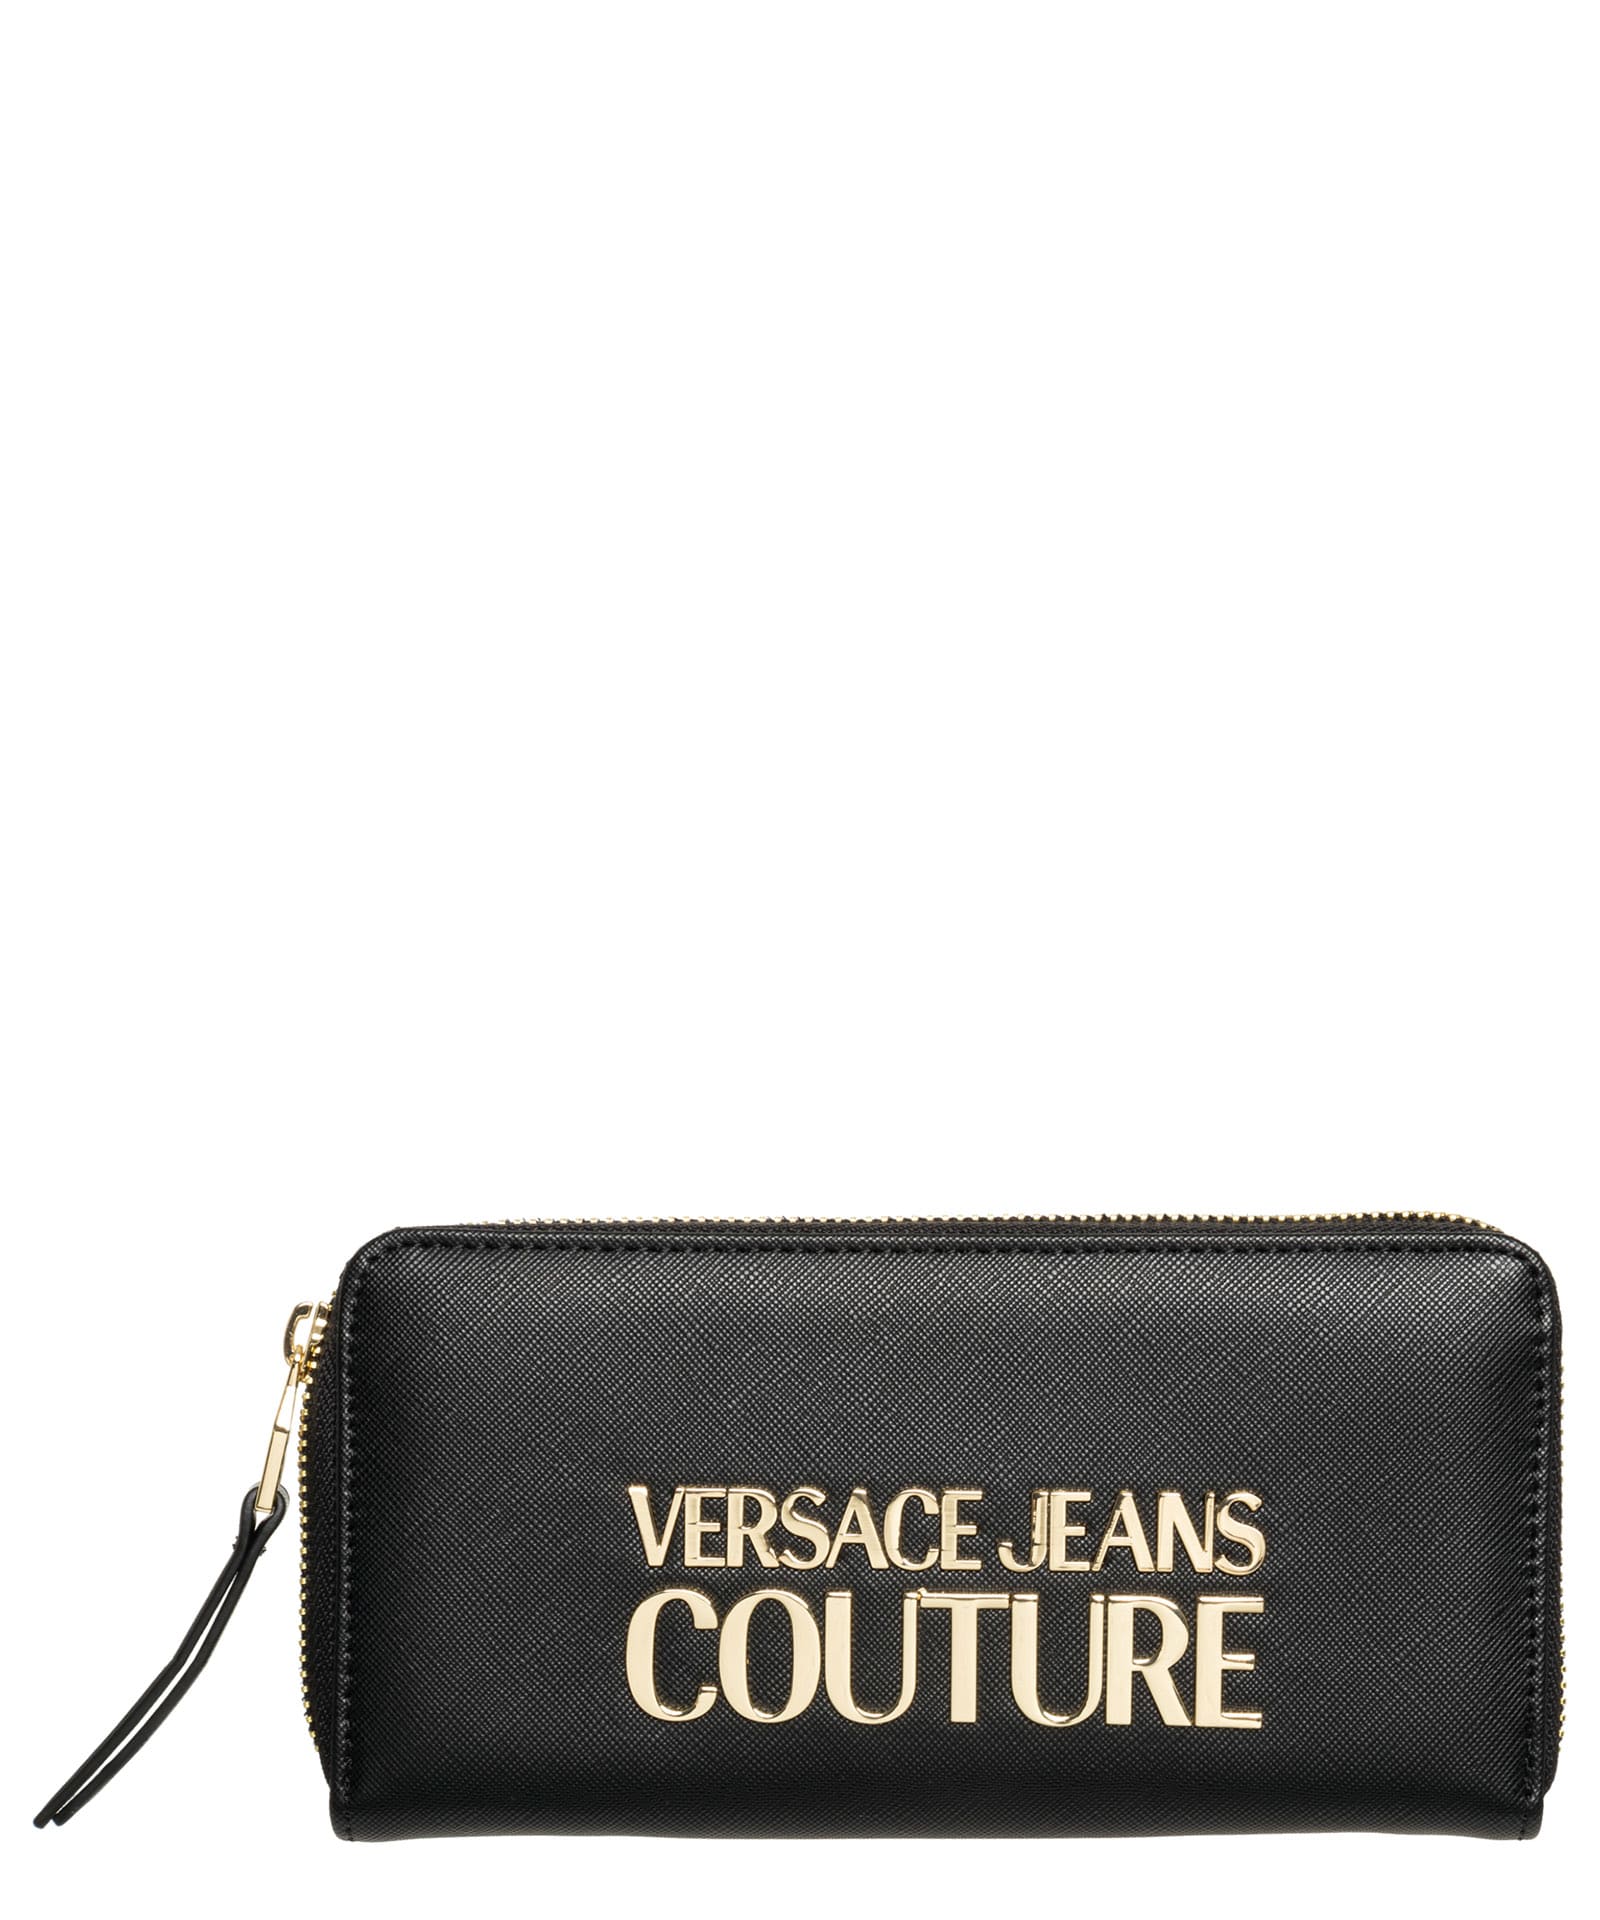 VERSACE JEANS COUTURE WALLET